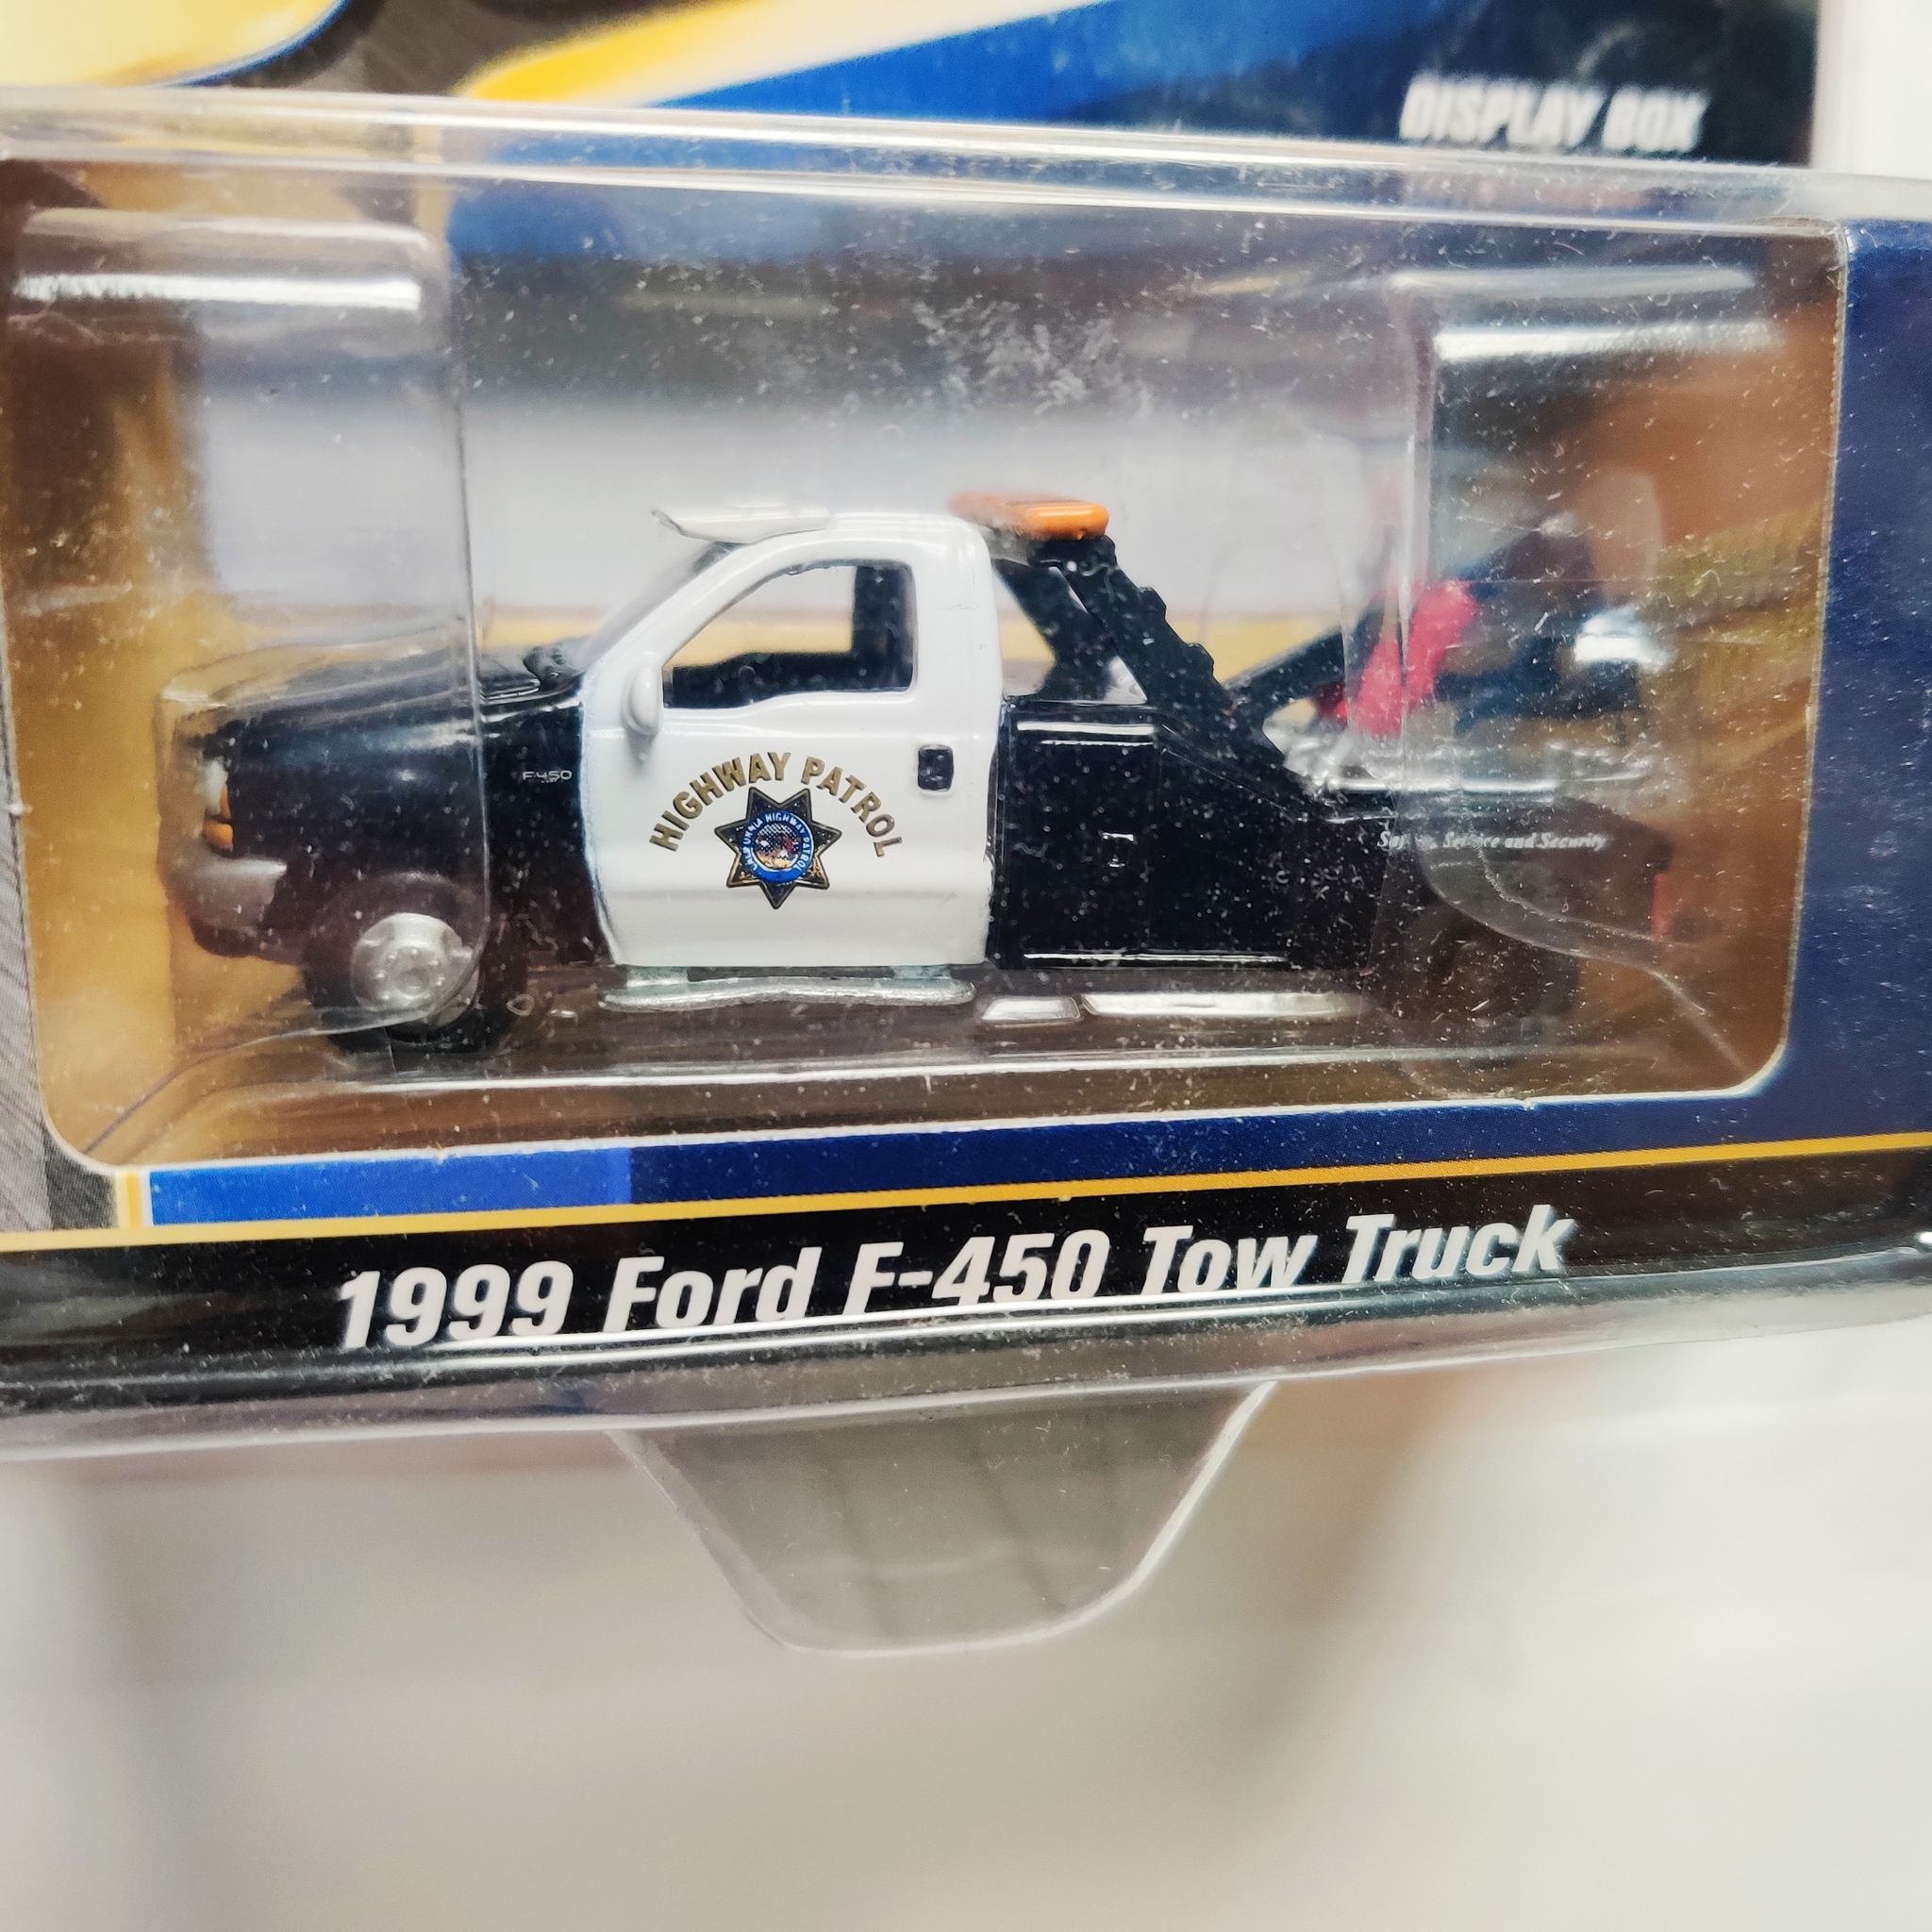 Skala 1/64 Greenlight "Active Duty" Ford F-450 Tow Truck 1999